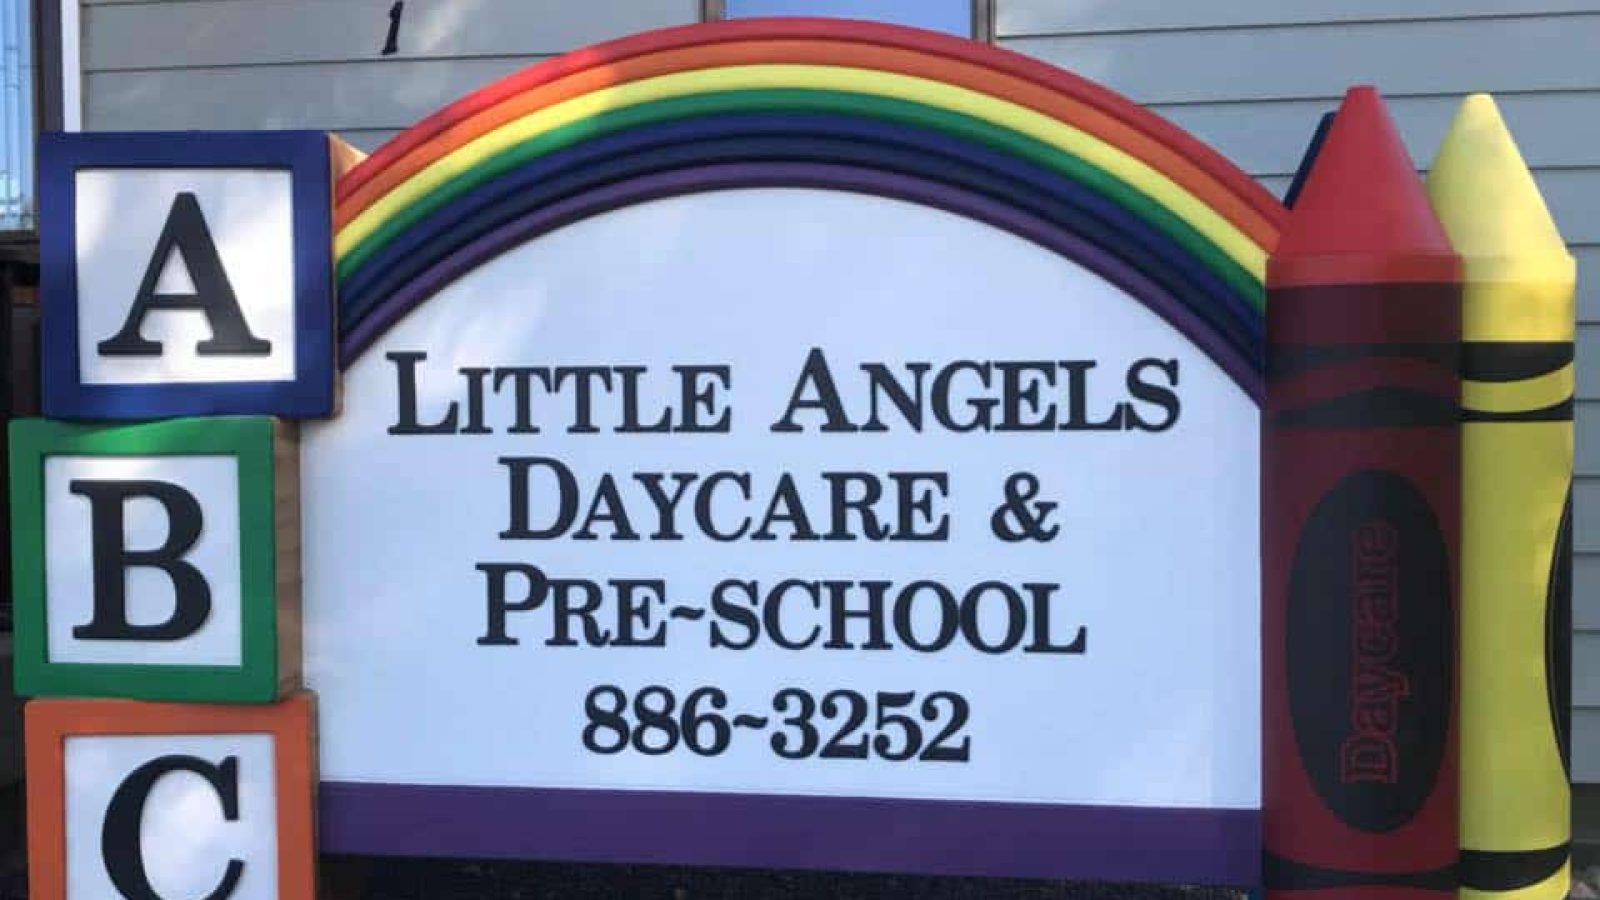 Day care and pre-school sign